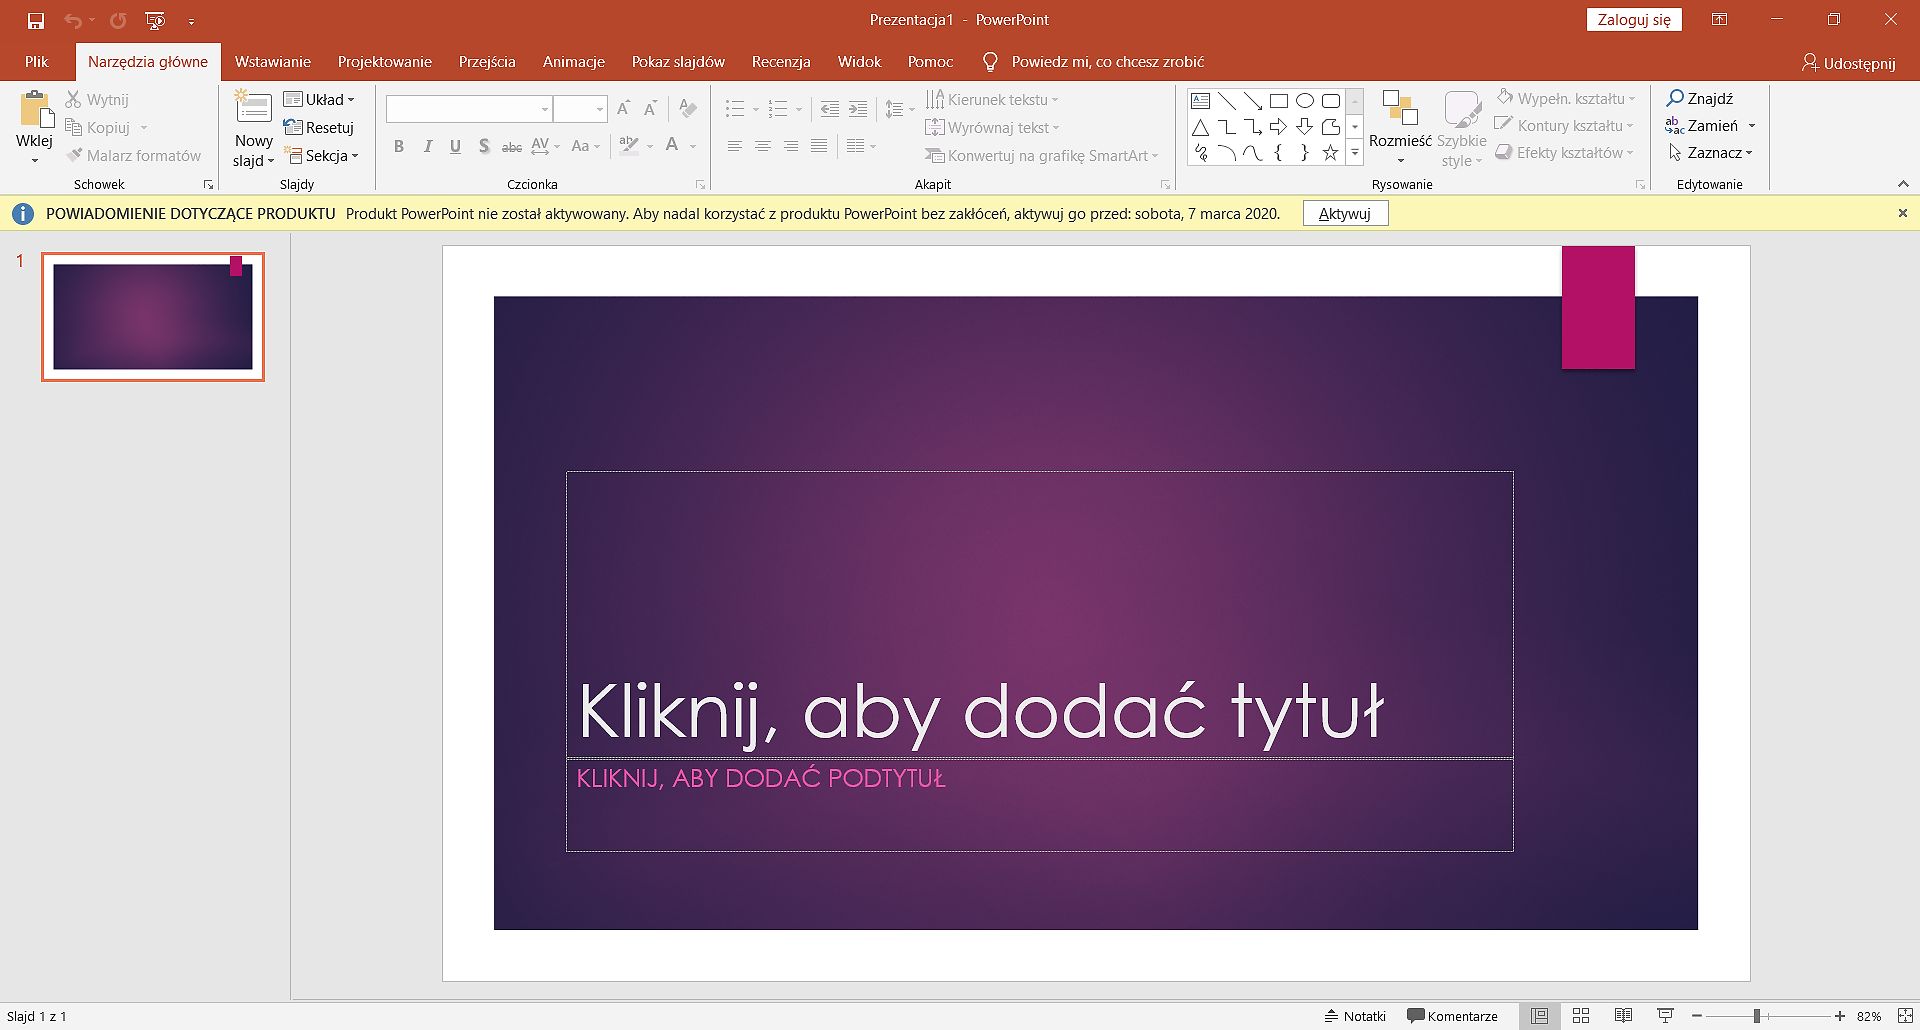 microsoft office powerpoint 2019 free download